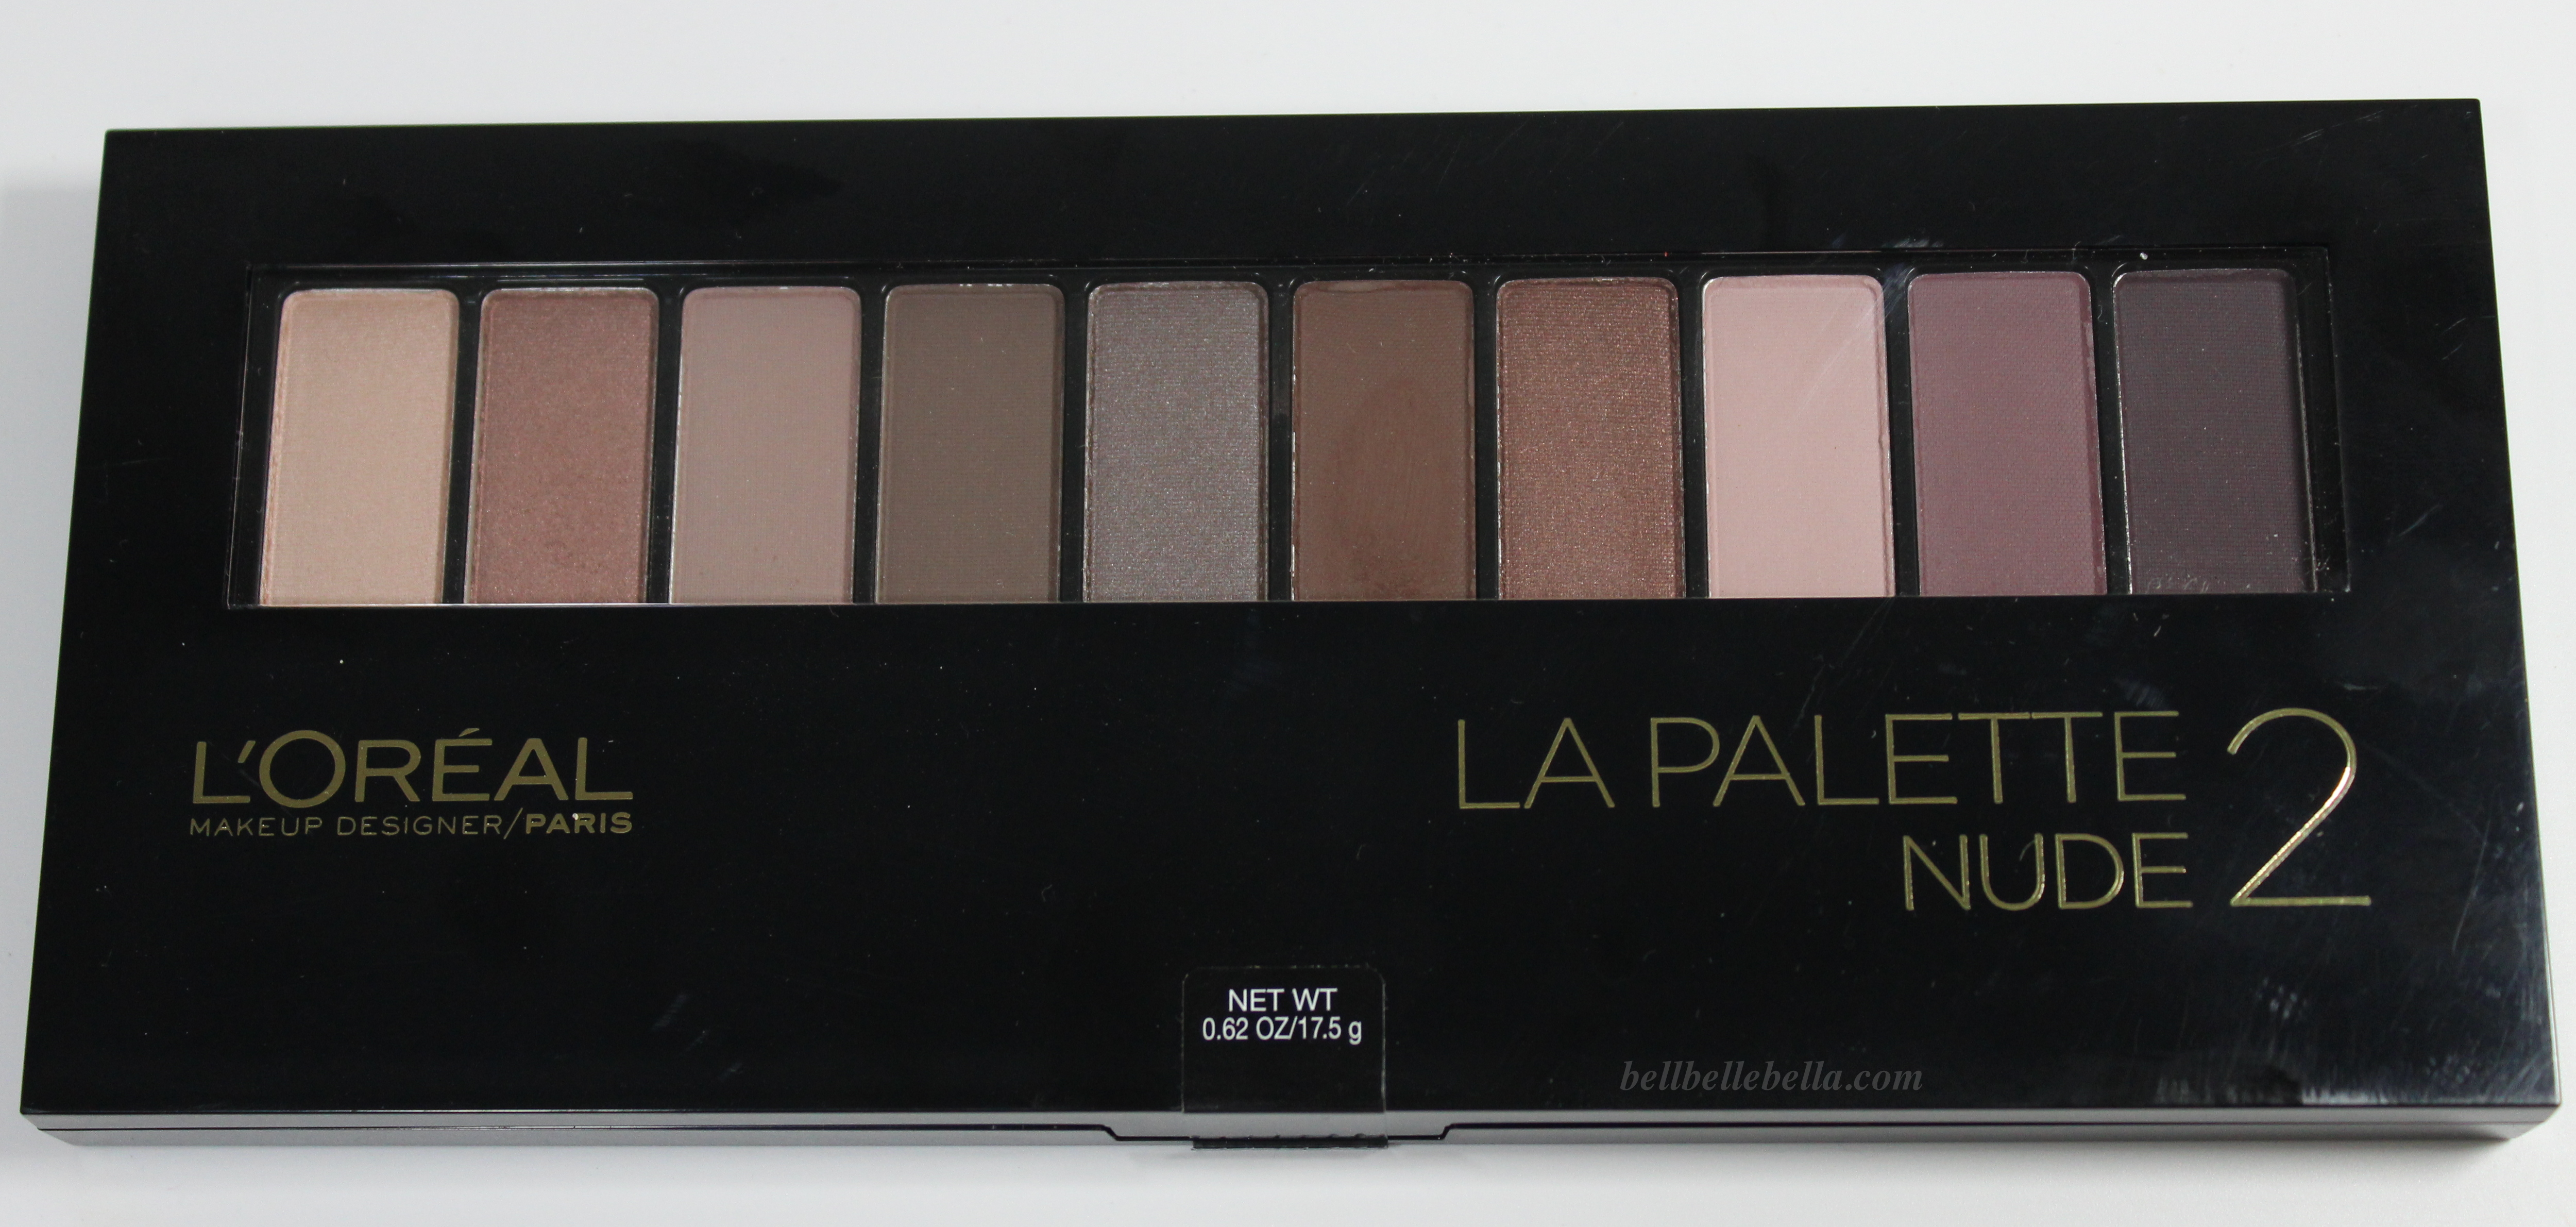 L’Oreal La Palette Nude 1 and 2 Swatches graphic